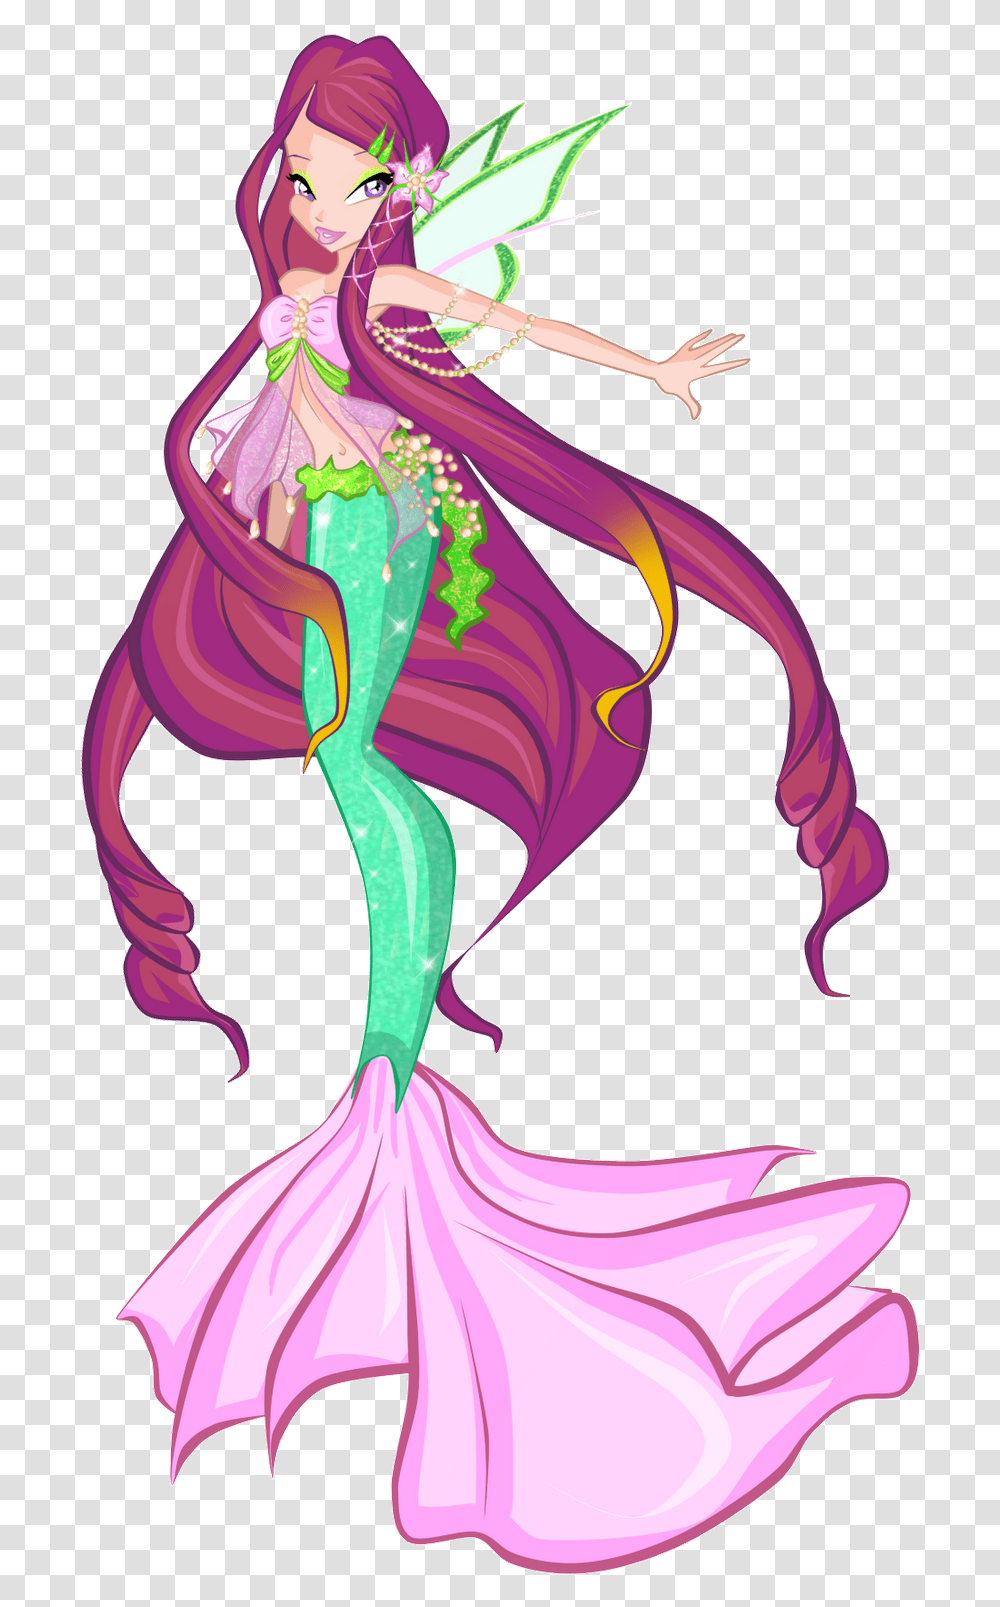 Transformation Drawing Mermaid Clipart Winx Club Reimagined As Mermaids, Purple, Floral Design, Pattern Transparent Png